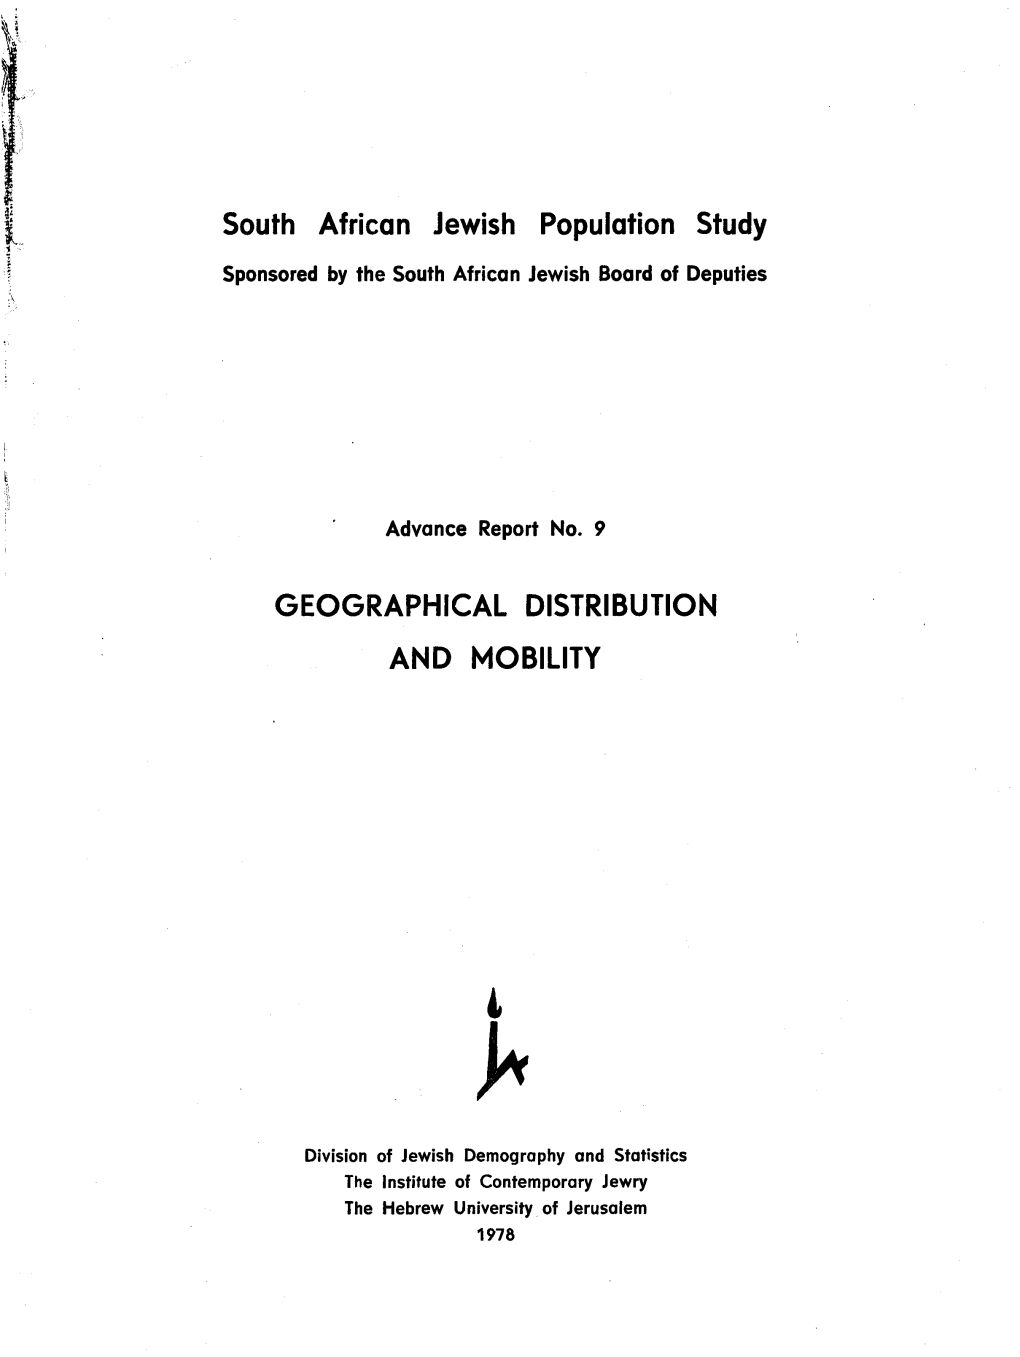 South African Jewish Population Study GEOGRAPHICAL